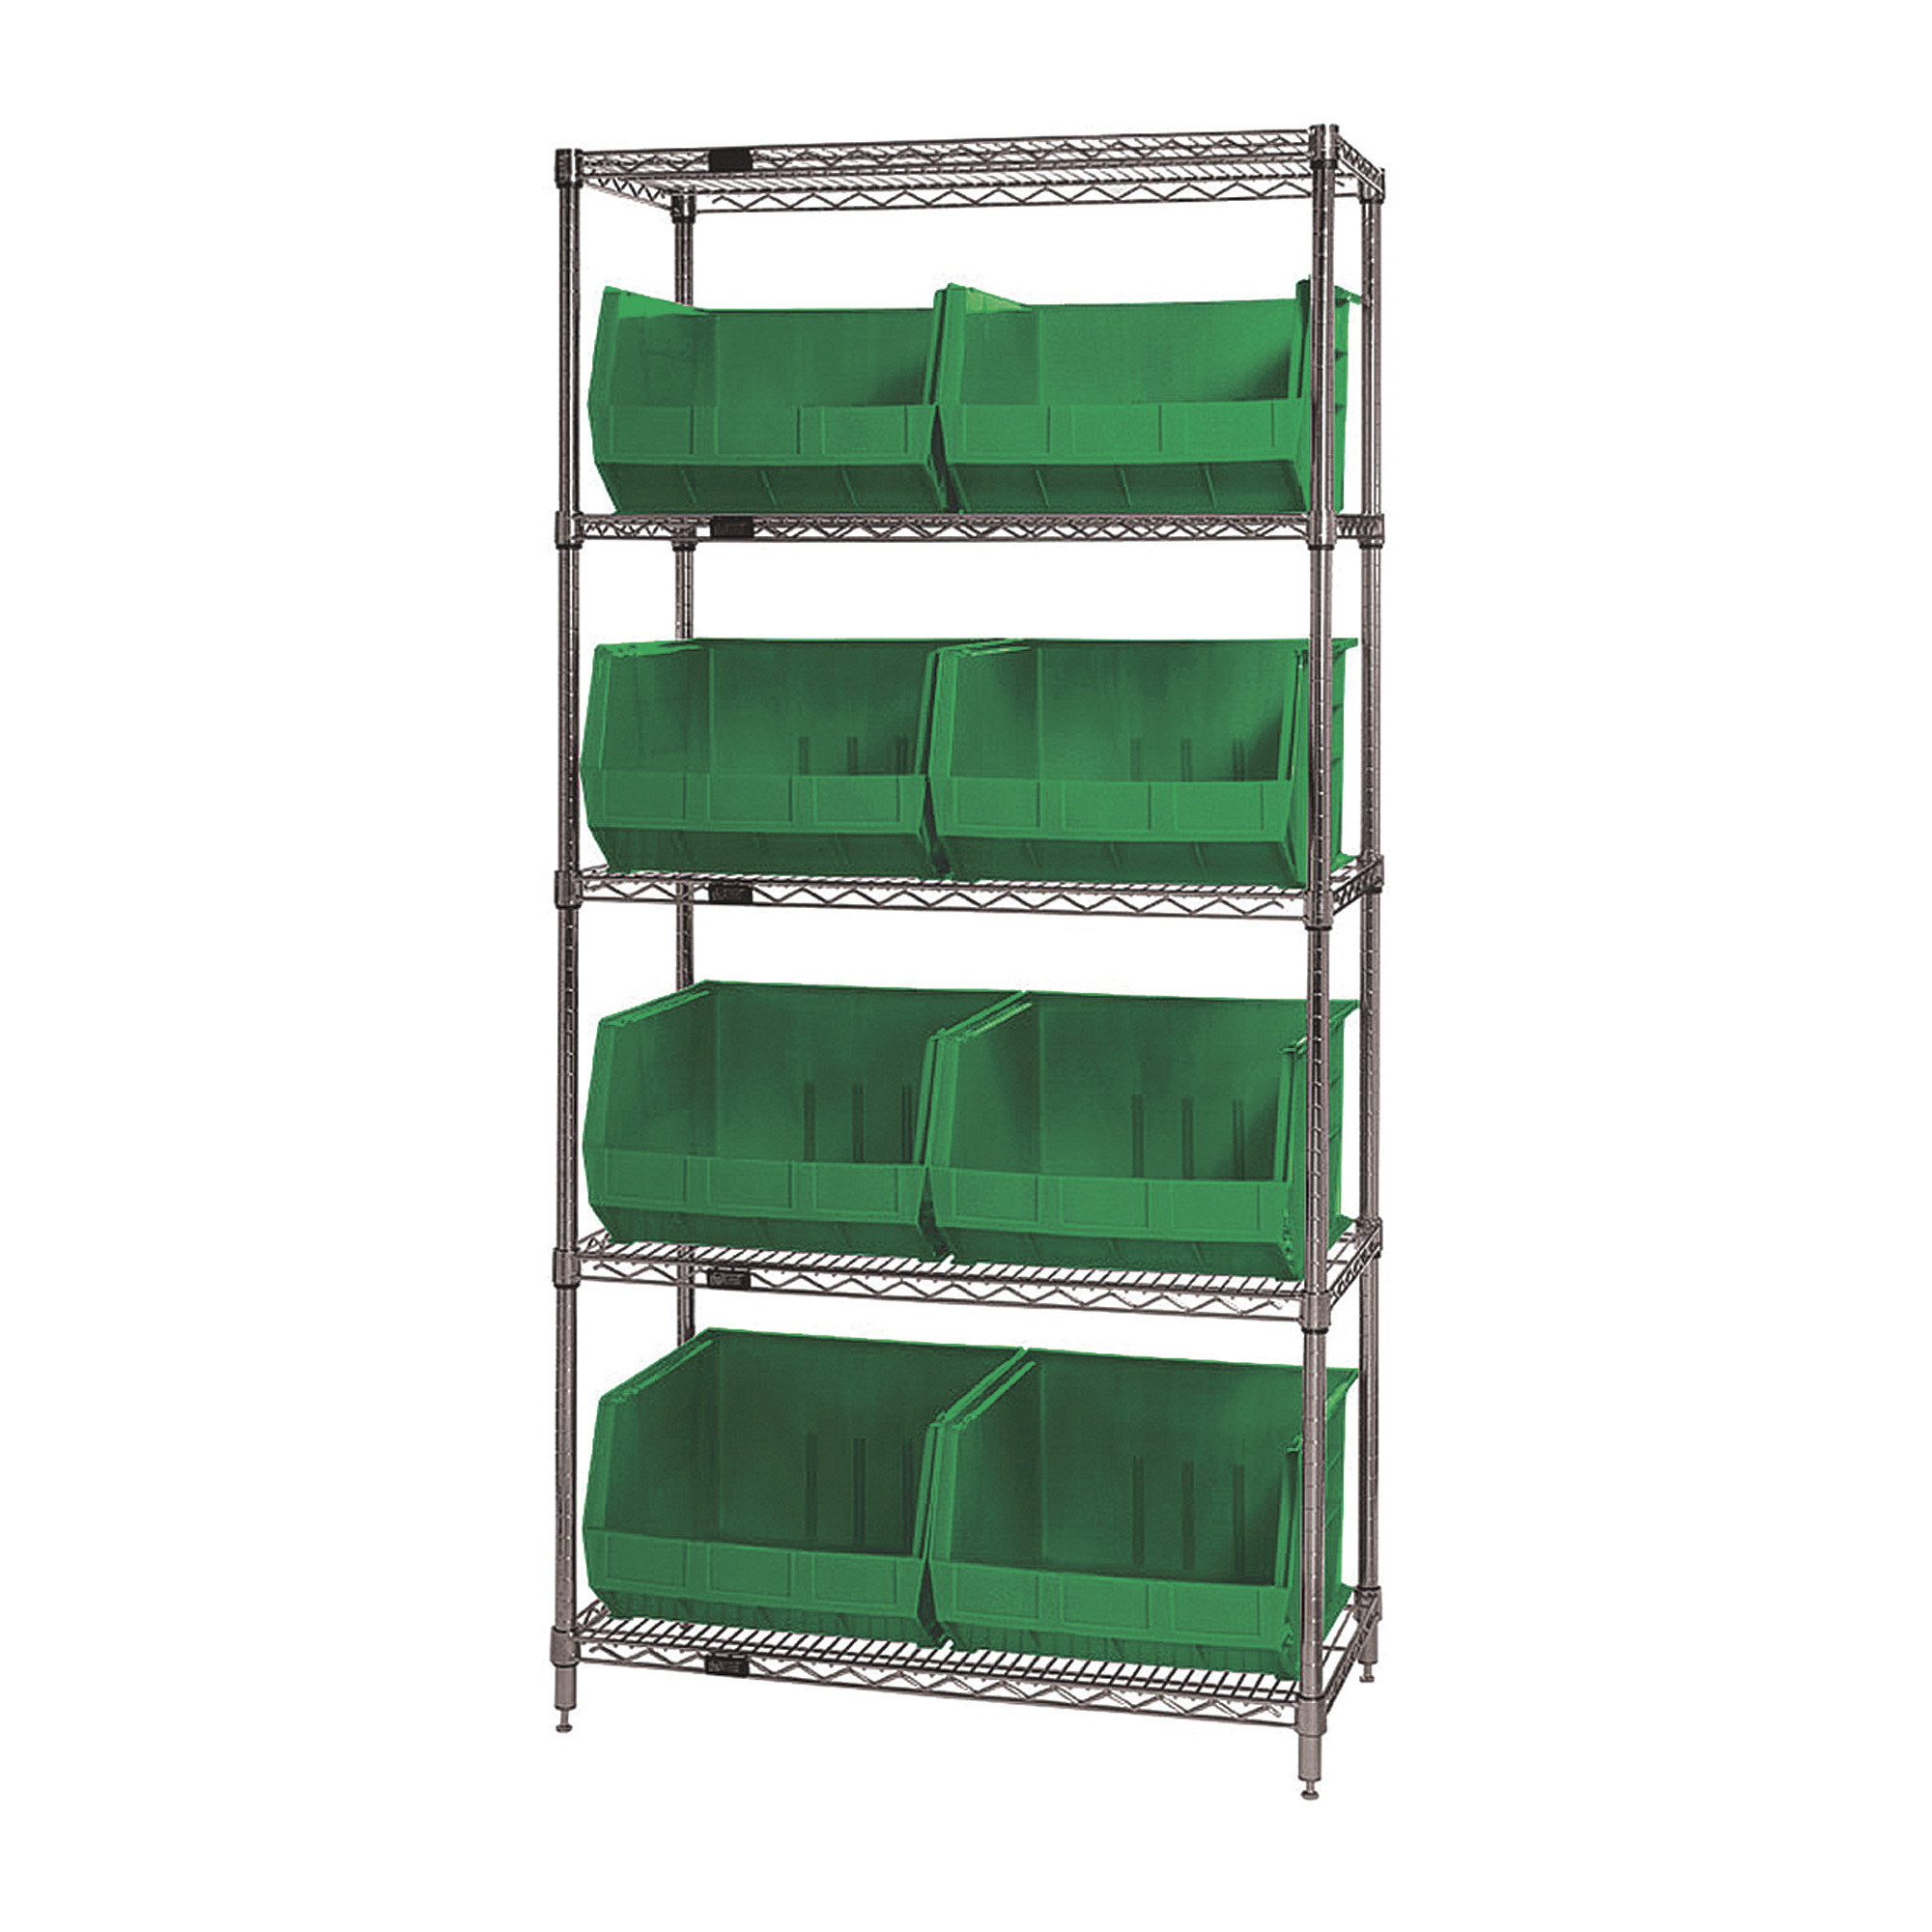 Quantum Storage Single Side Wire Chrome Shelving Unit with 8 Ultra Bins — 18Inch L x 36Inch W x 74Inch H, Green, Model WR5-270GN -  Quantum Storage Systems